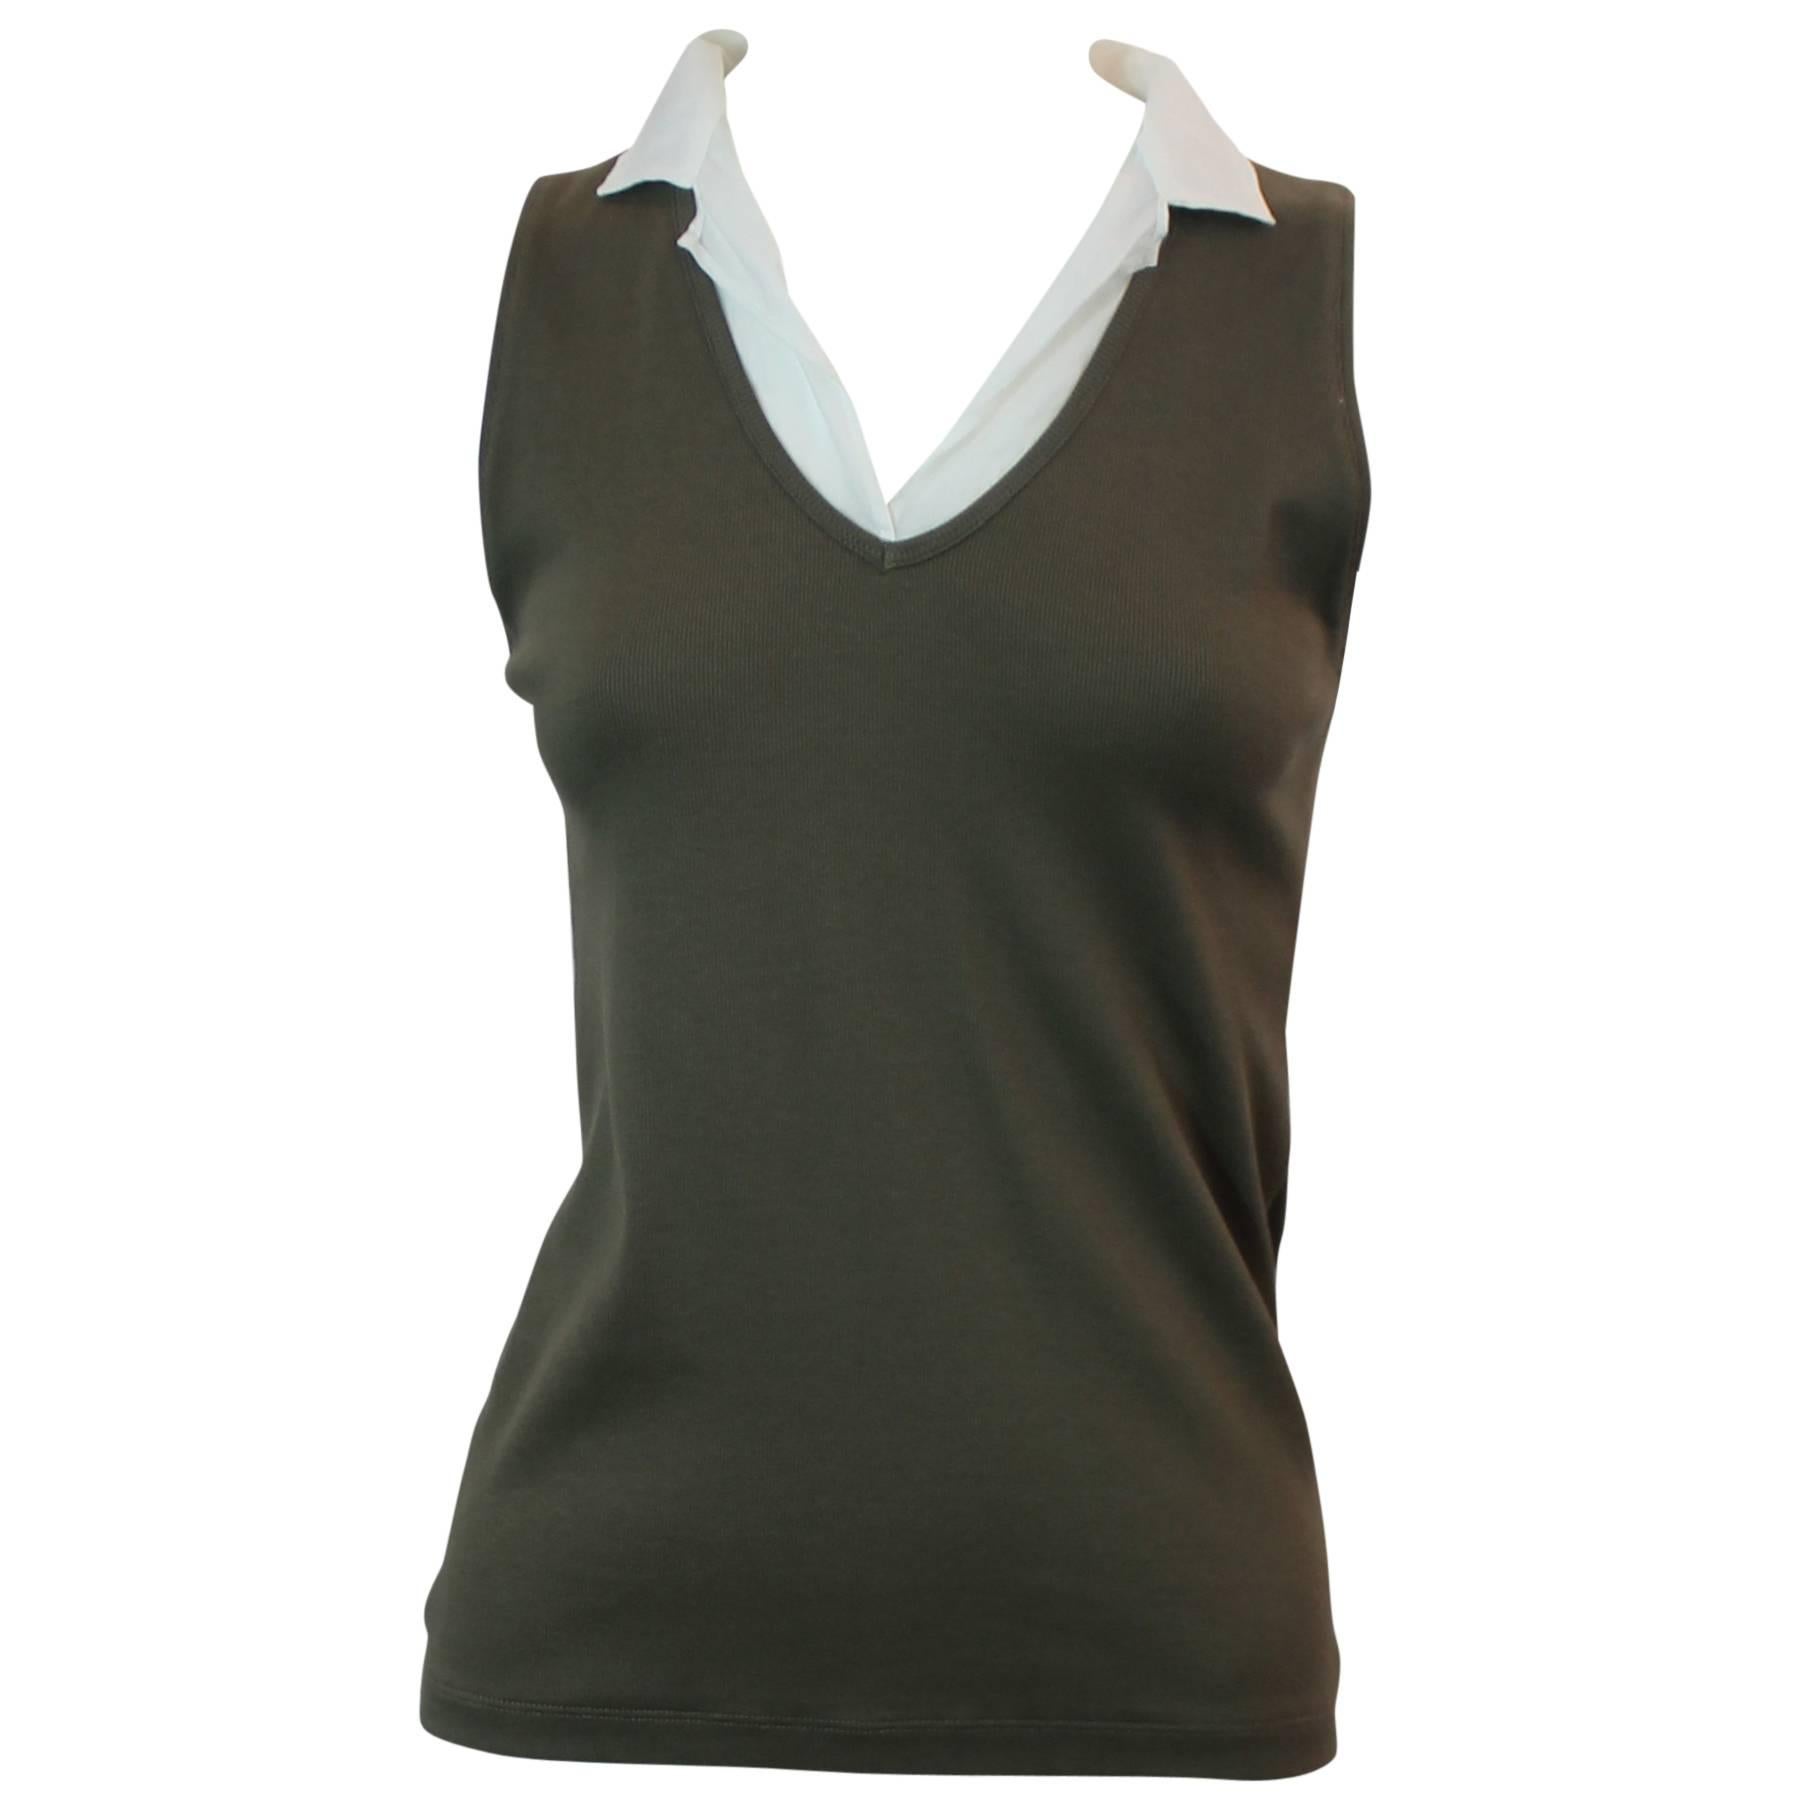 Brunello Cucinelli Olive and White Cotton Blend Sleeveless Top - L.